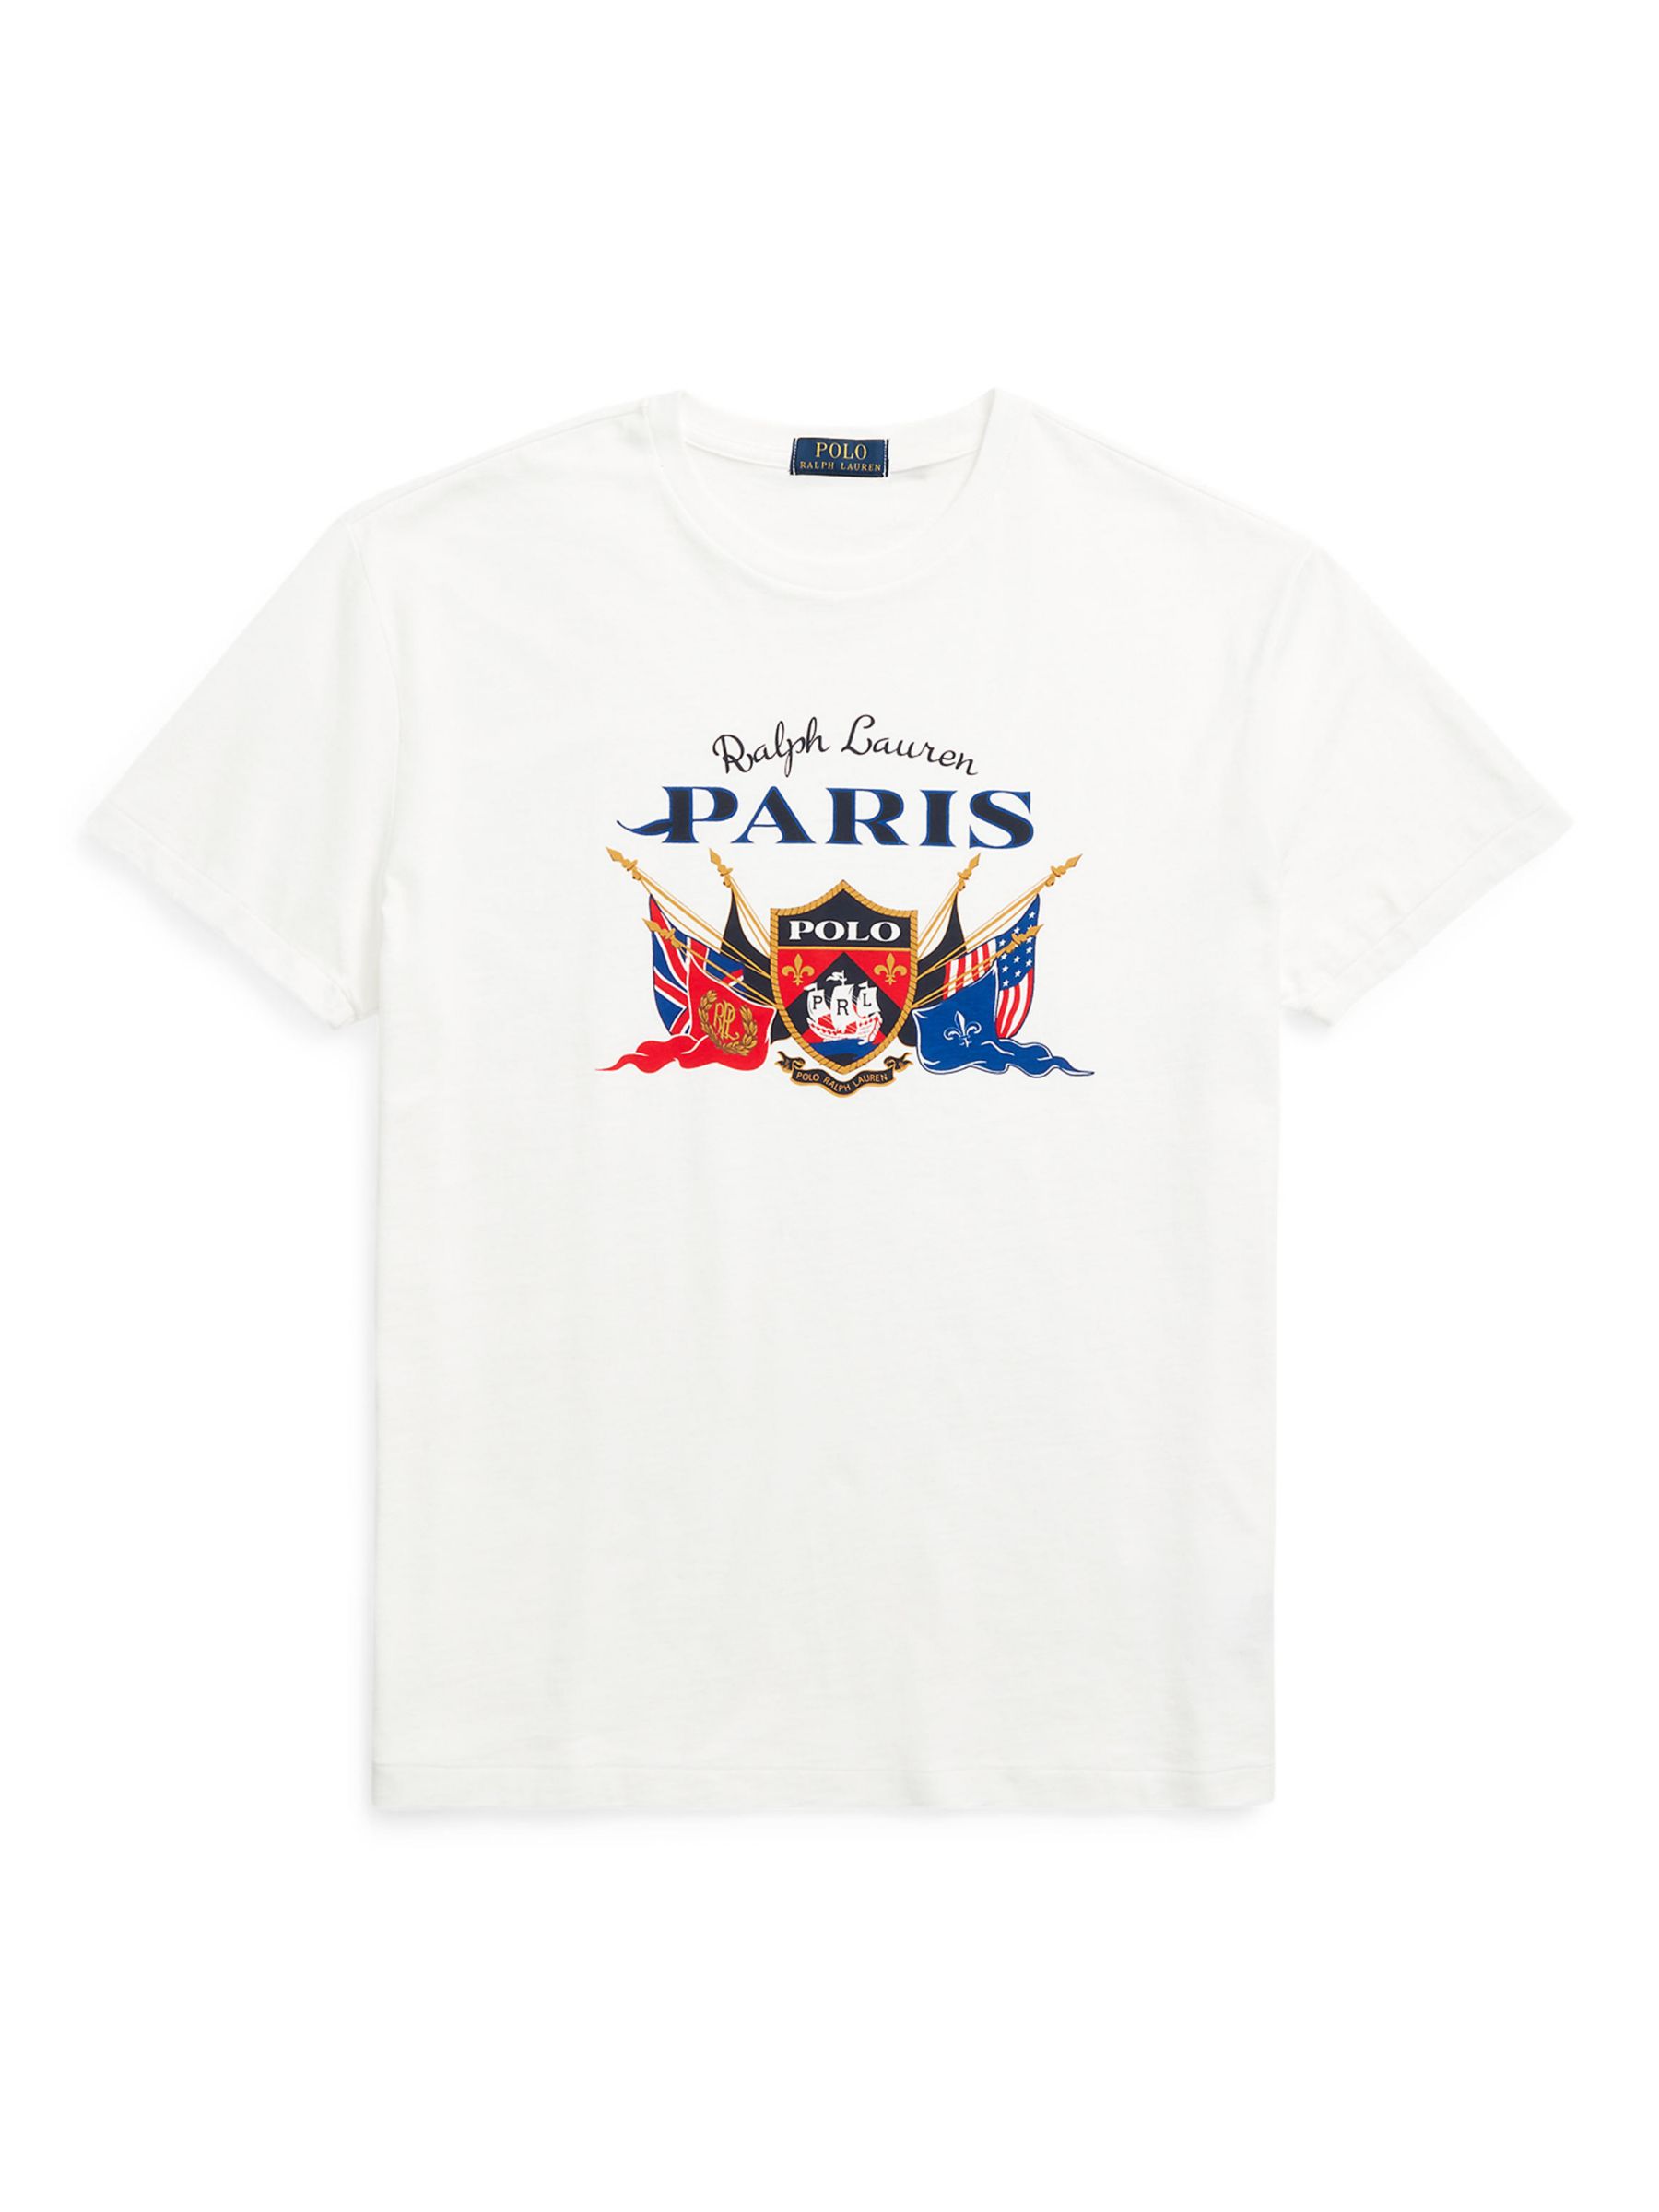 Buy Ralph Lauren Classic Fit Graphic Jersey T-Shirt, Classic Oxford White Online at johnlewis.com